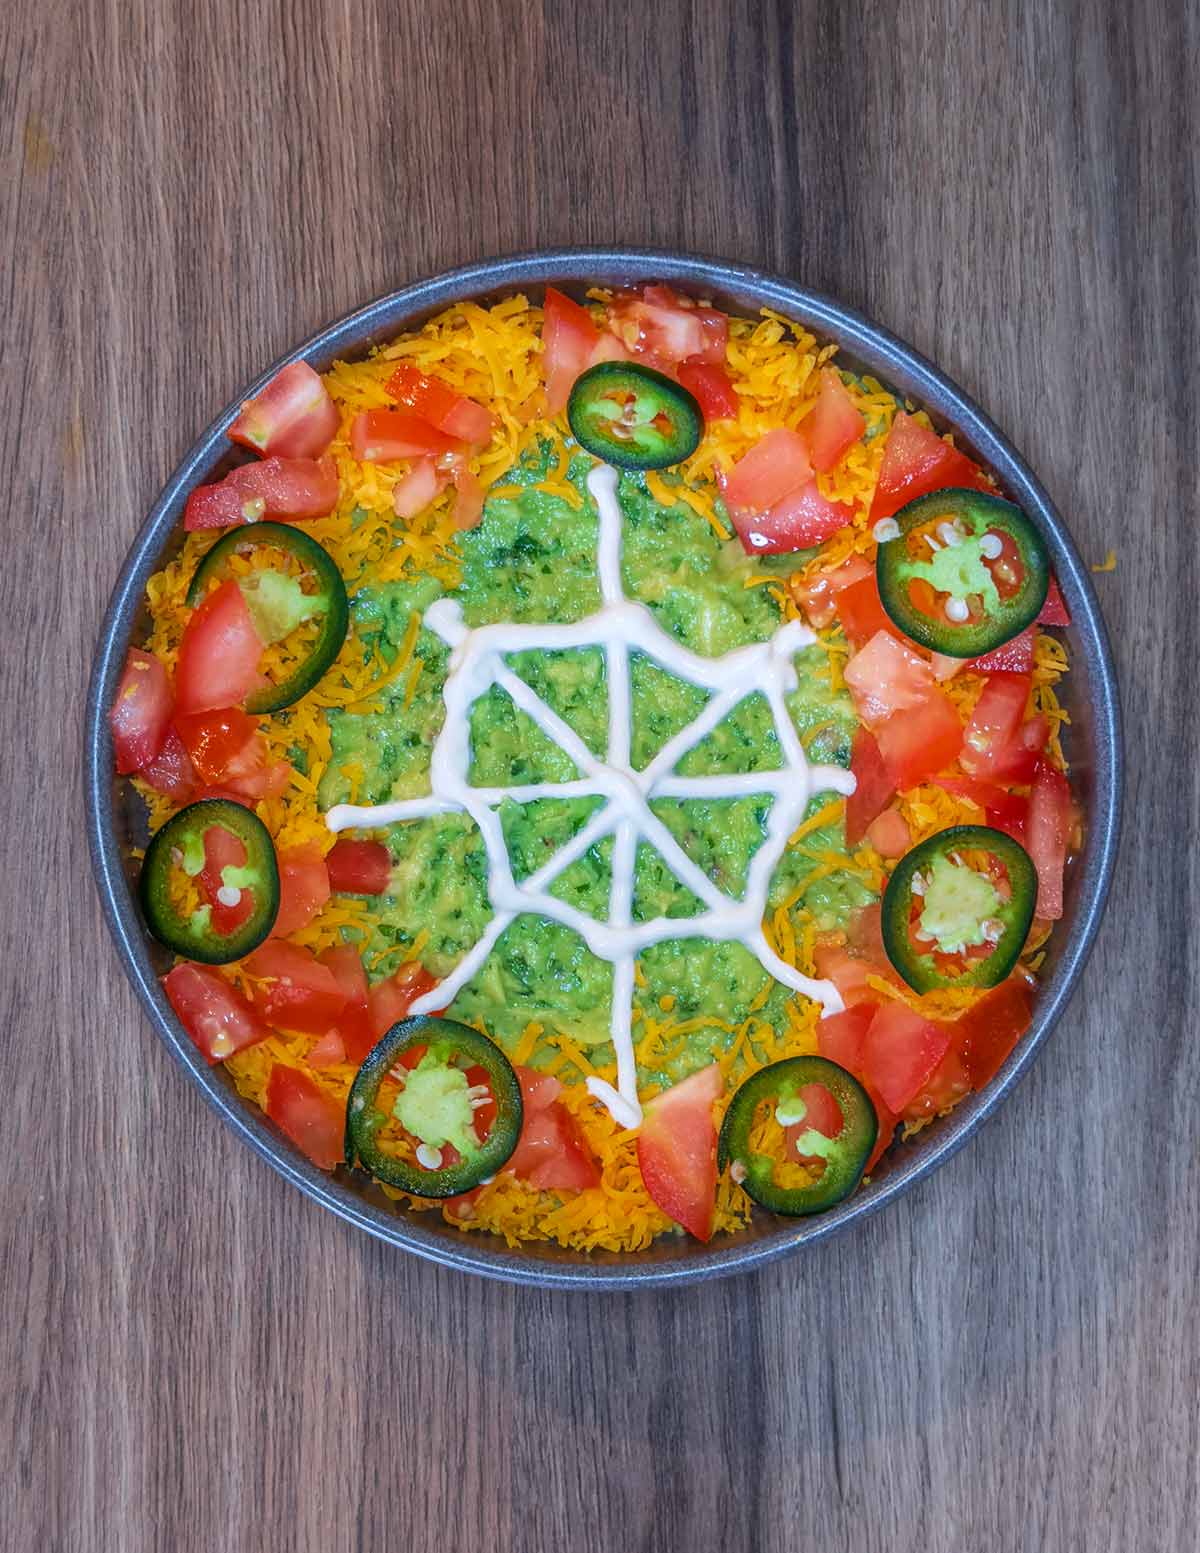 A spider's web drawn in sour cream on top of the guacamole.